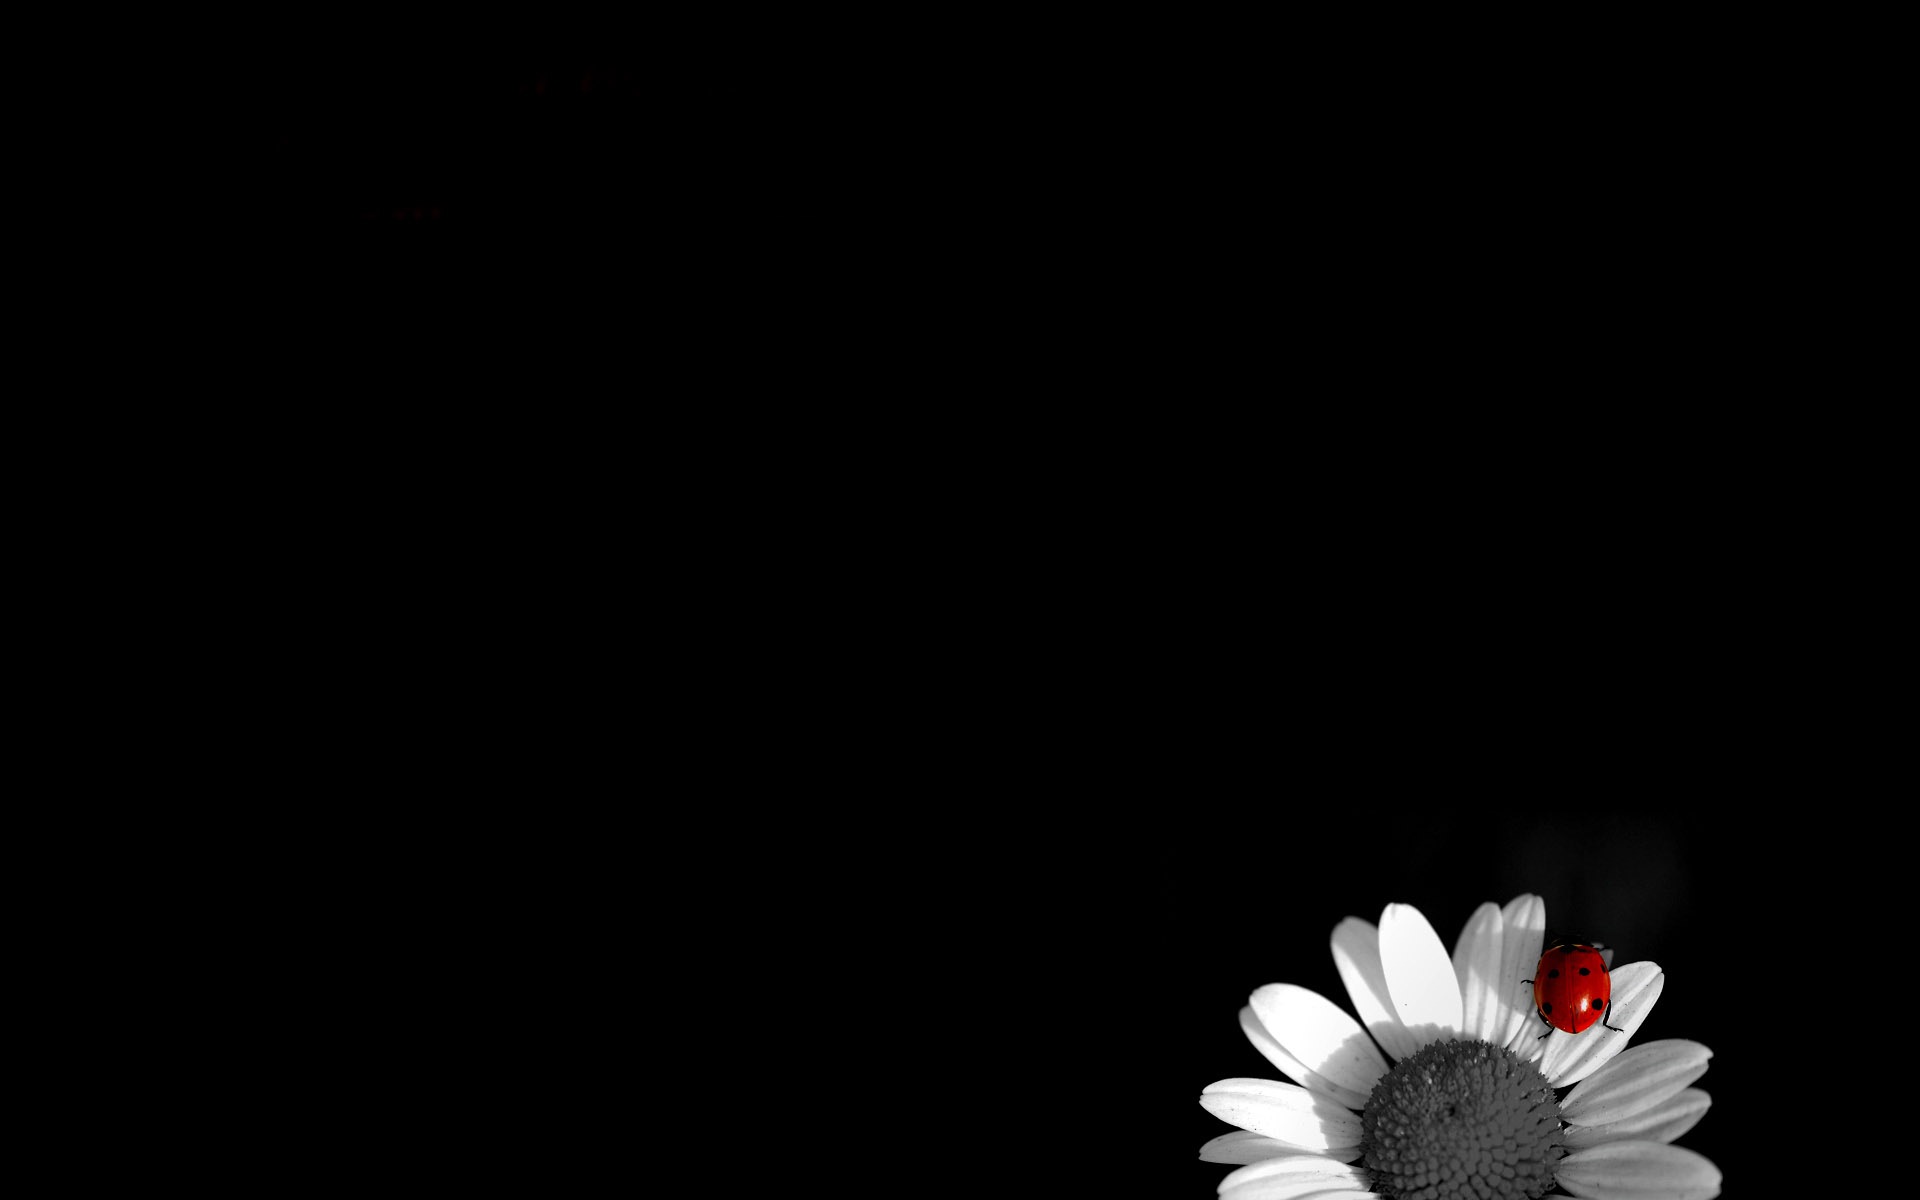 Previous Image Go Back To Black And White Flower Wallpaper HD For